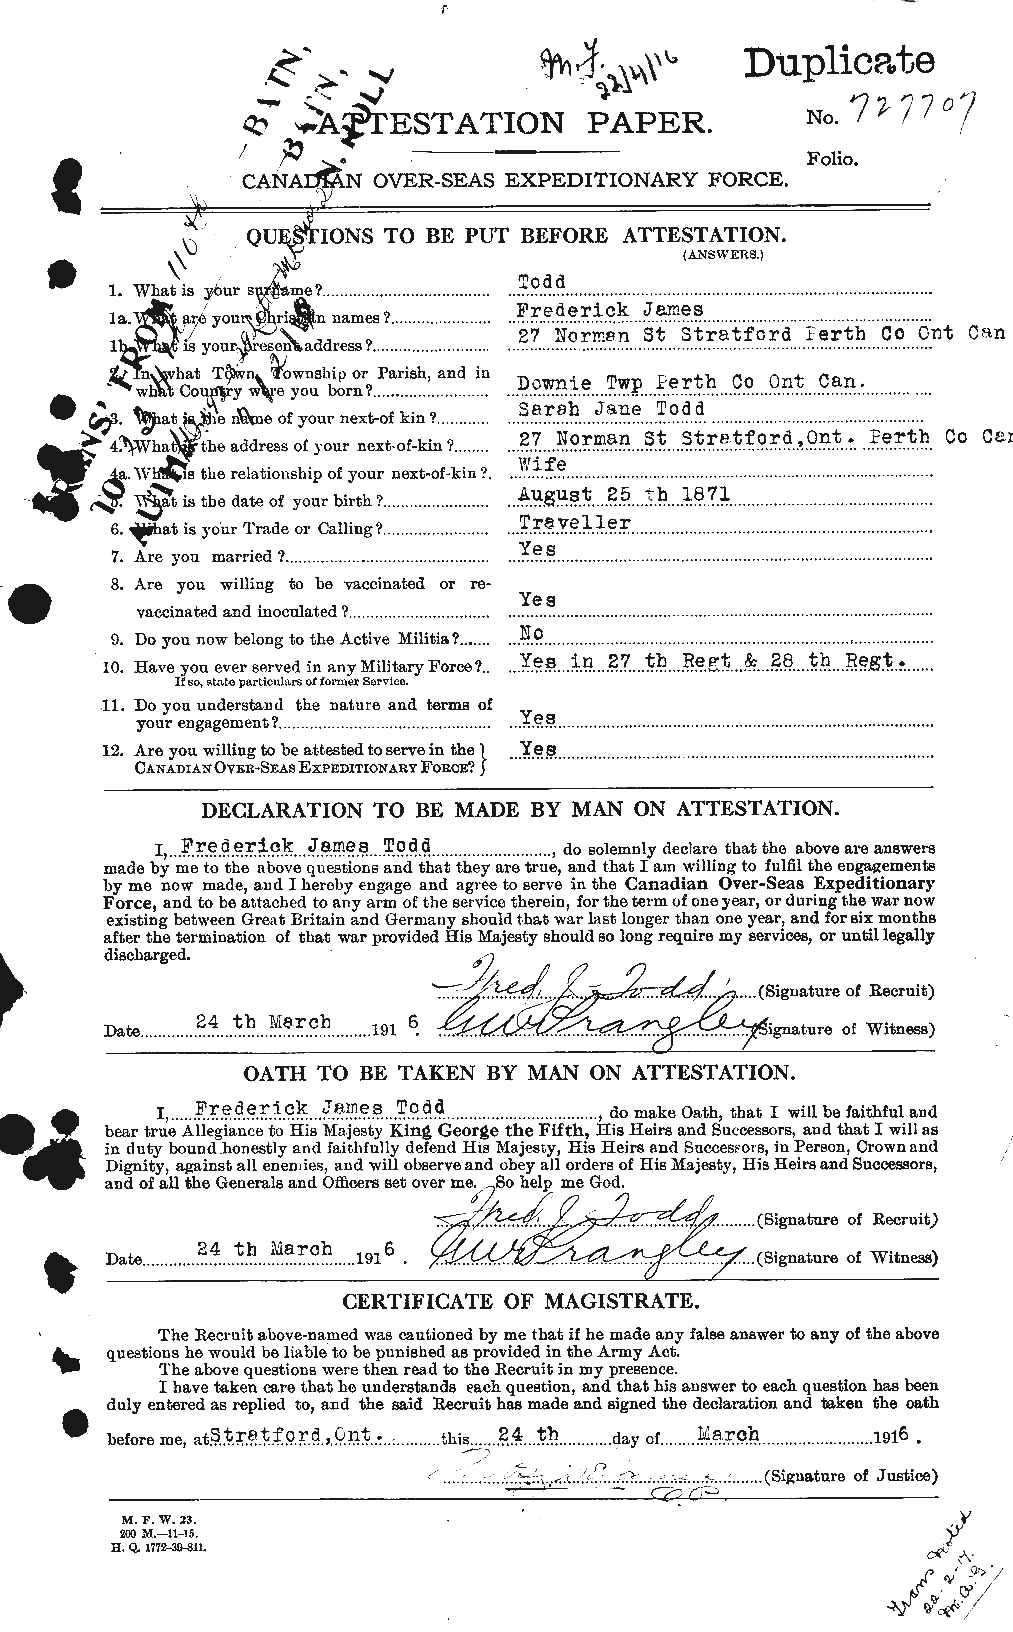 Personnel Records of the First World War - CEF 640718a